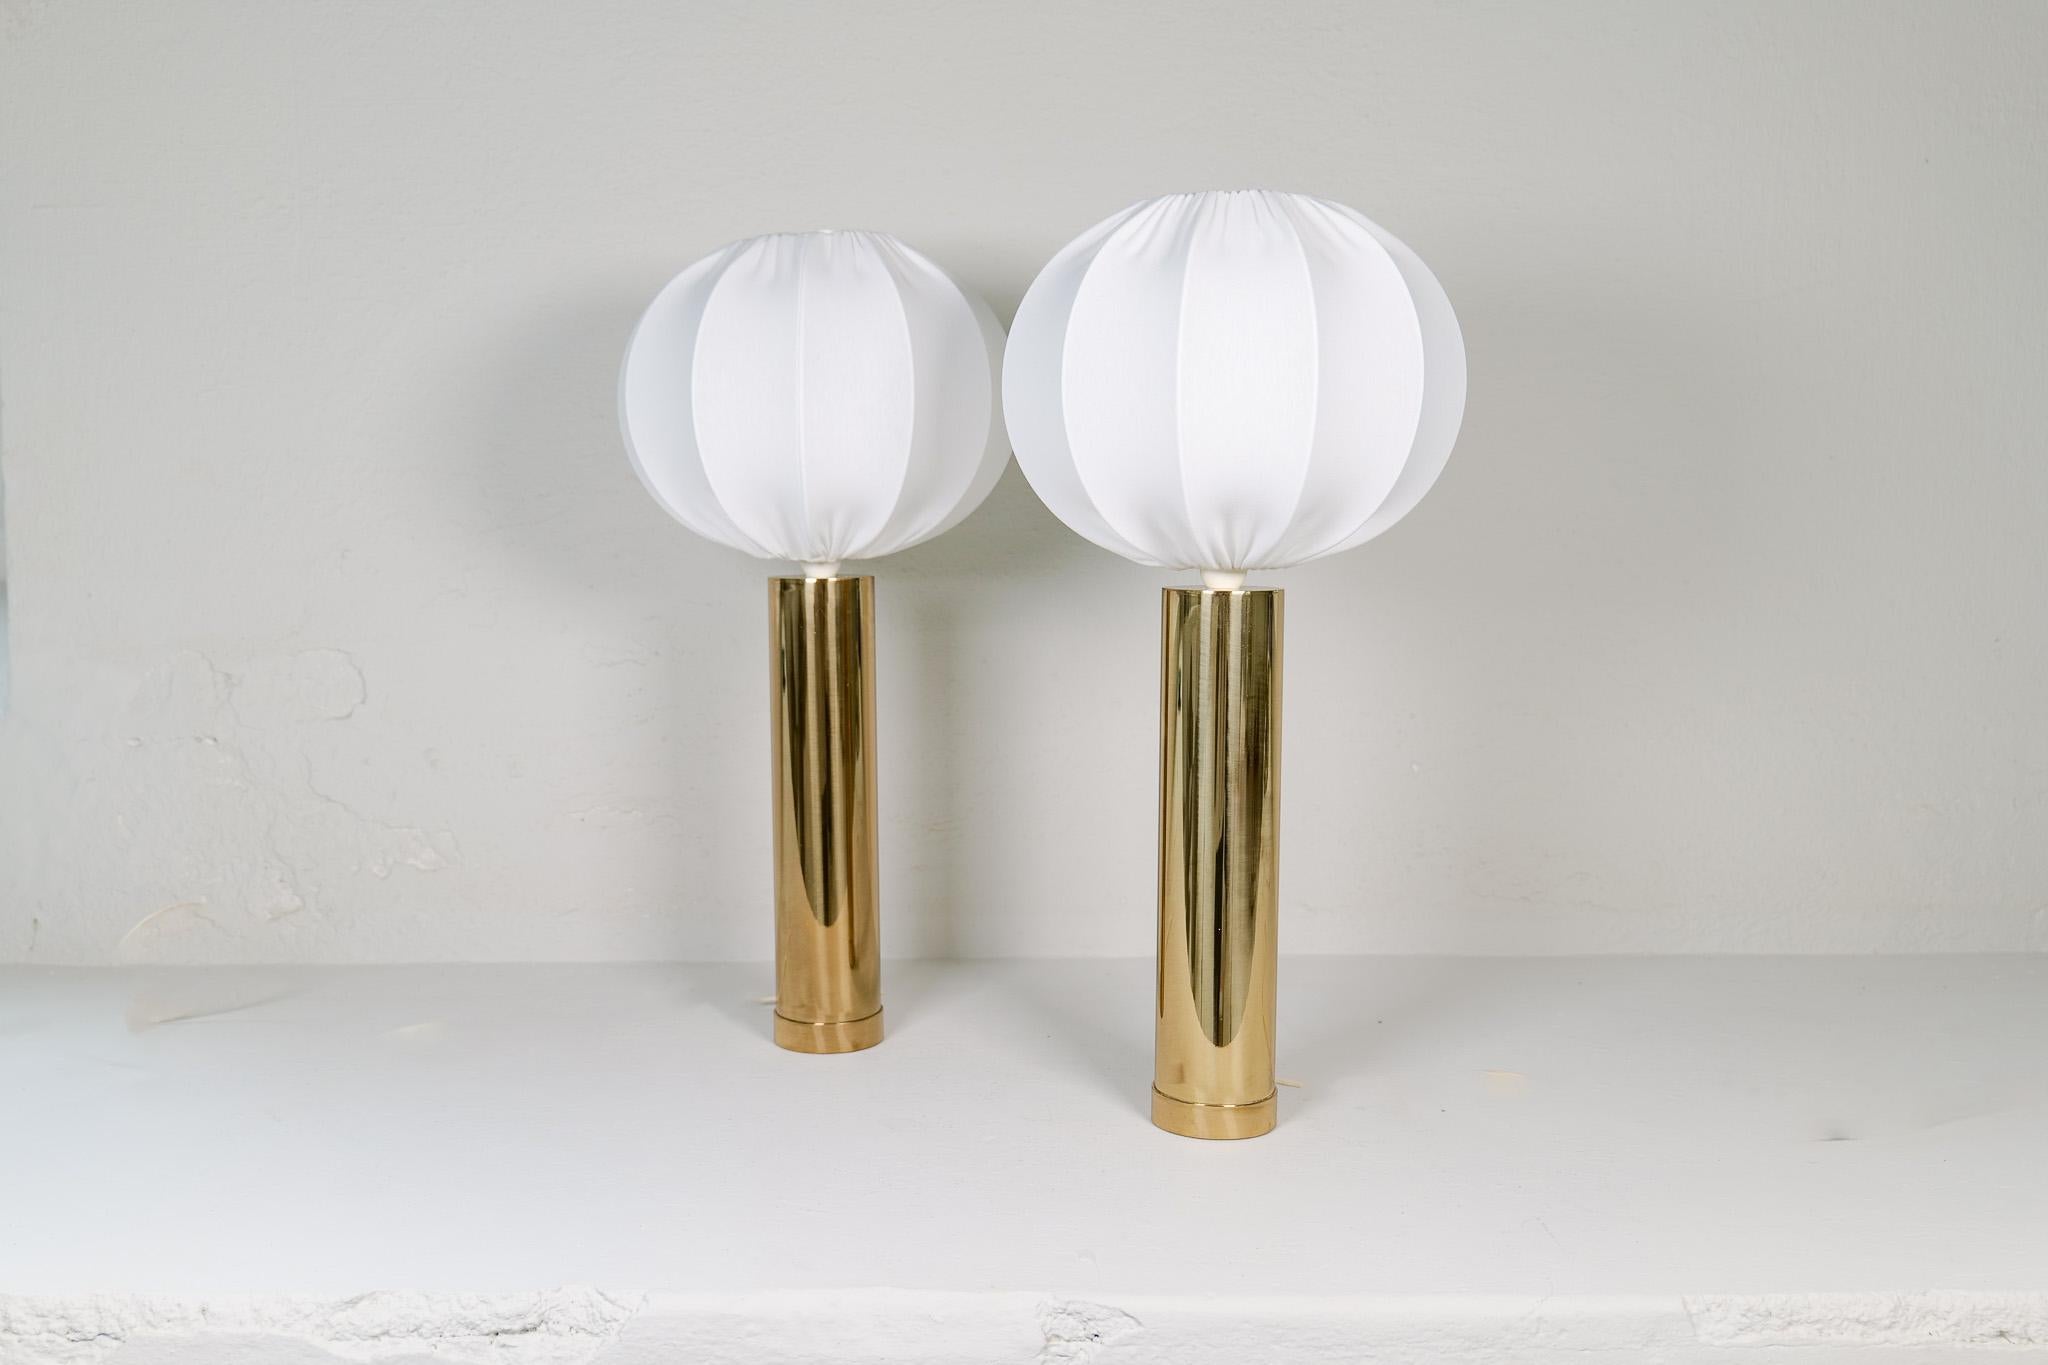 Mid-Century Modern Midcentury Pair of Large Brass Bergboms B-010 Table Lamps, 1960s, Sweden For Sale